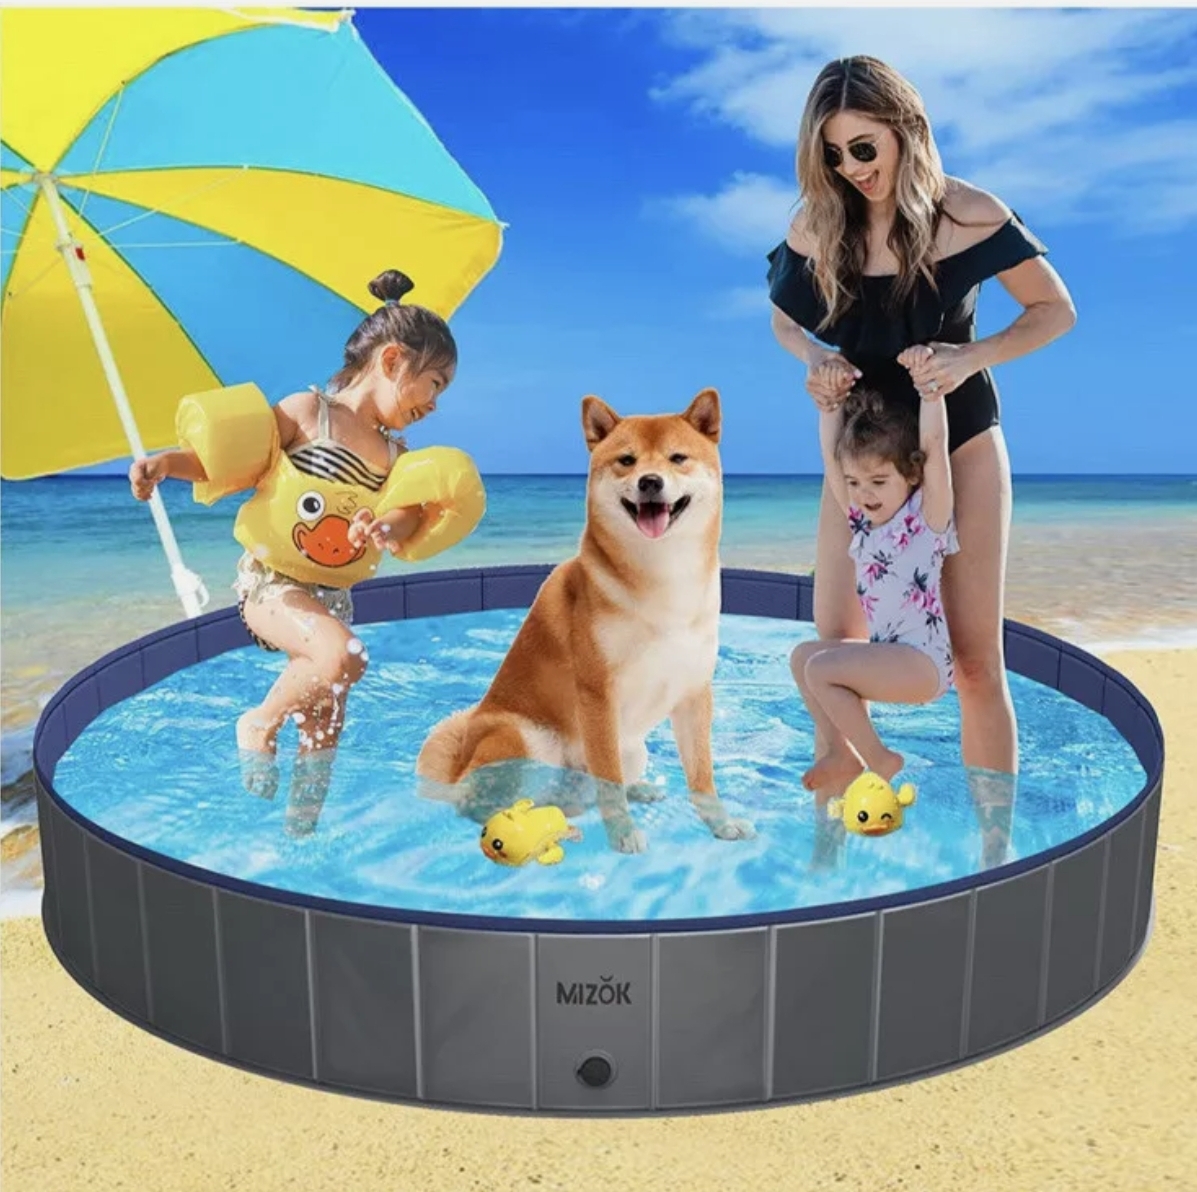 MIZOK Paddling Pool for Large Dogs and Kids.